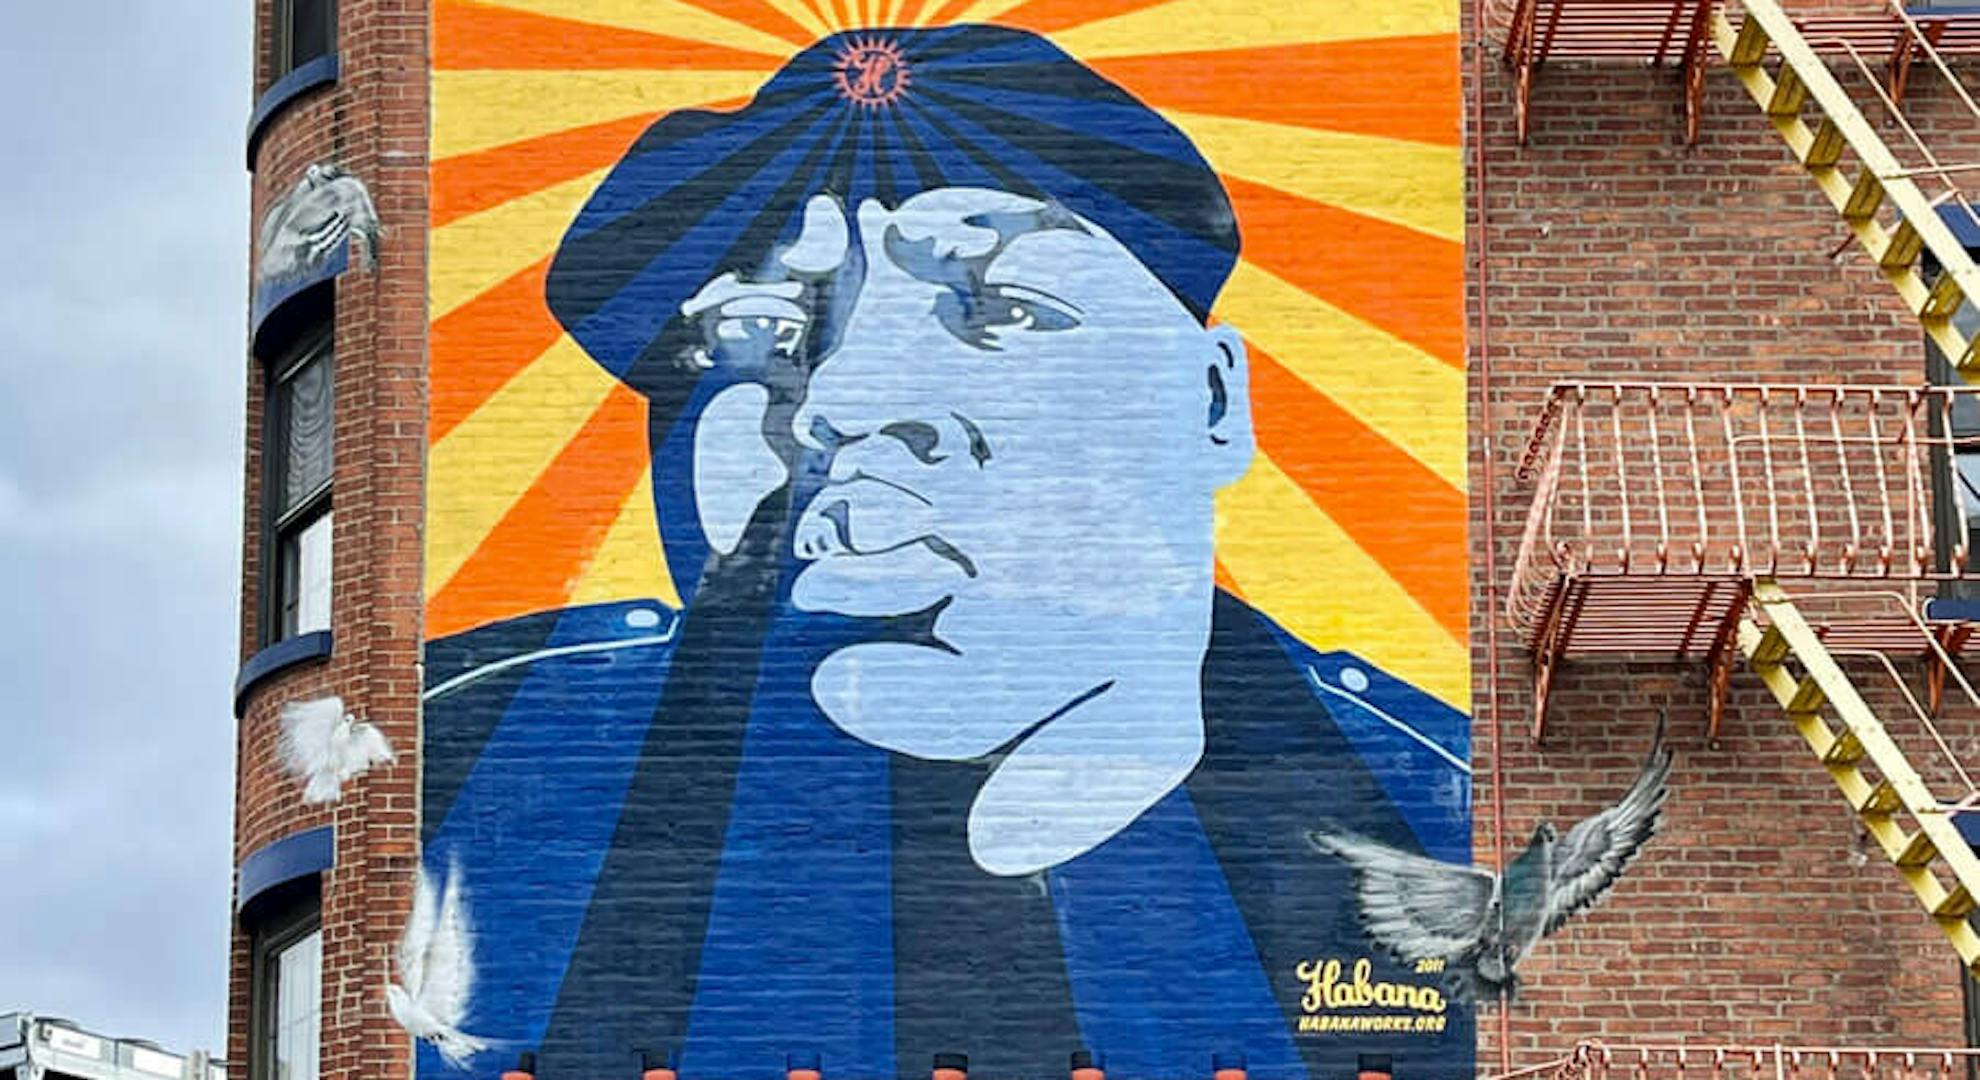 A mural of The Notorious B.I.G. the corner of Fulton & South Portland by Lee Quinones.